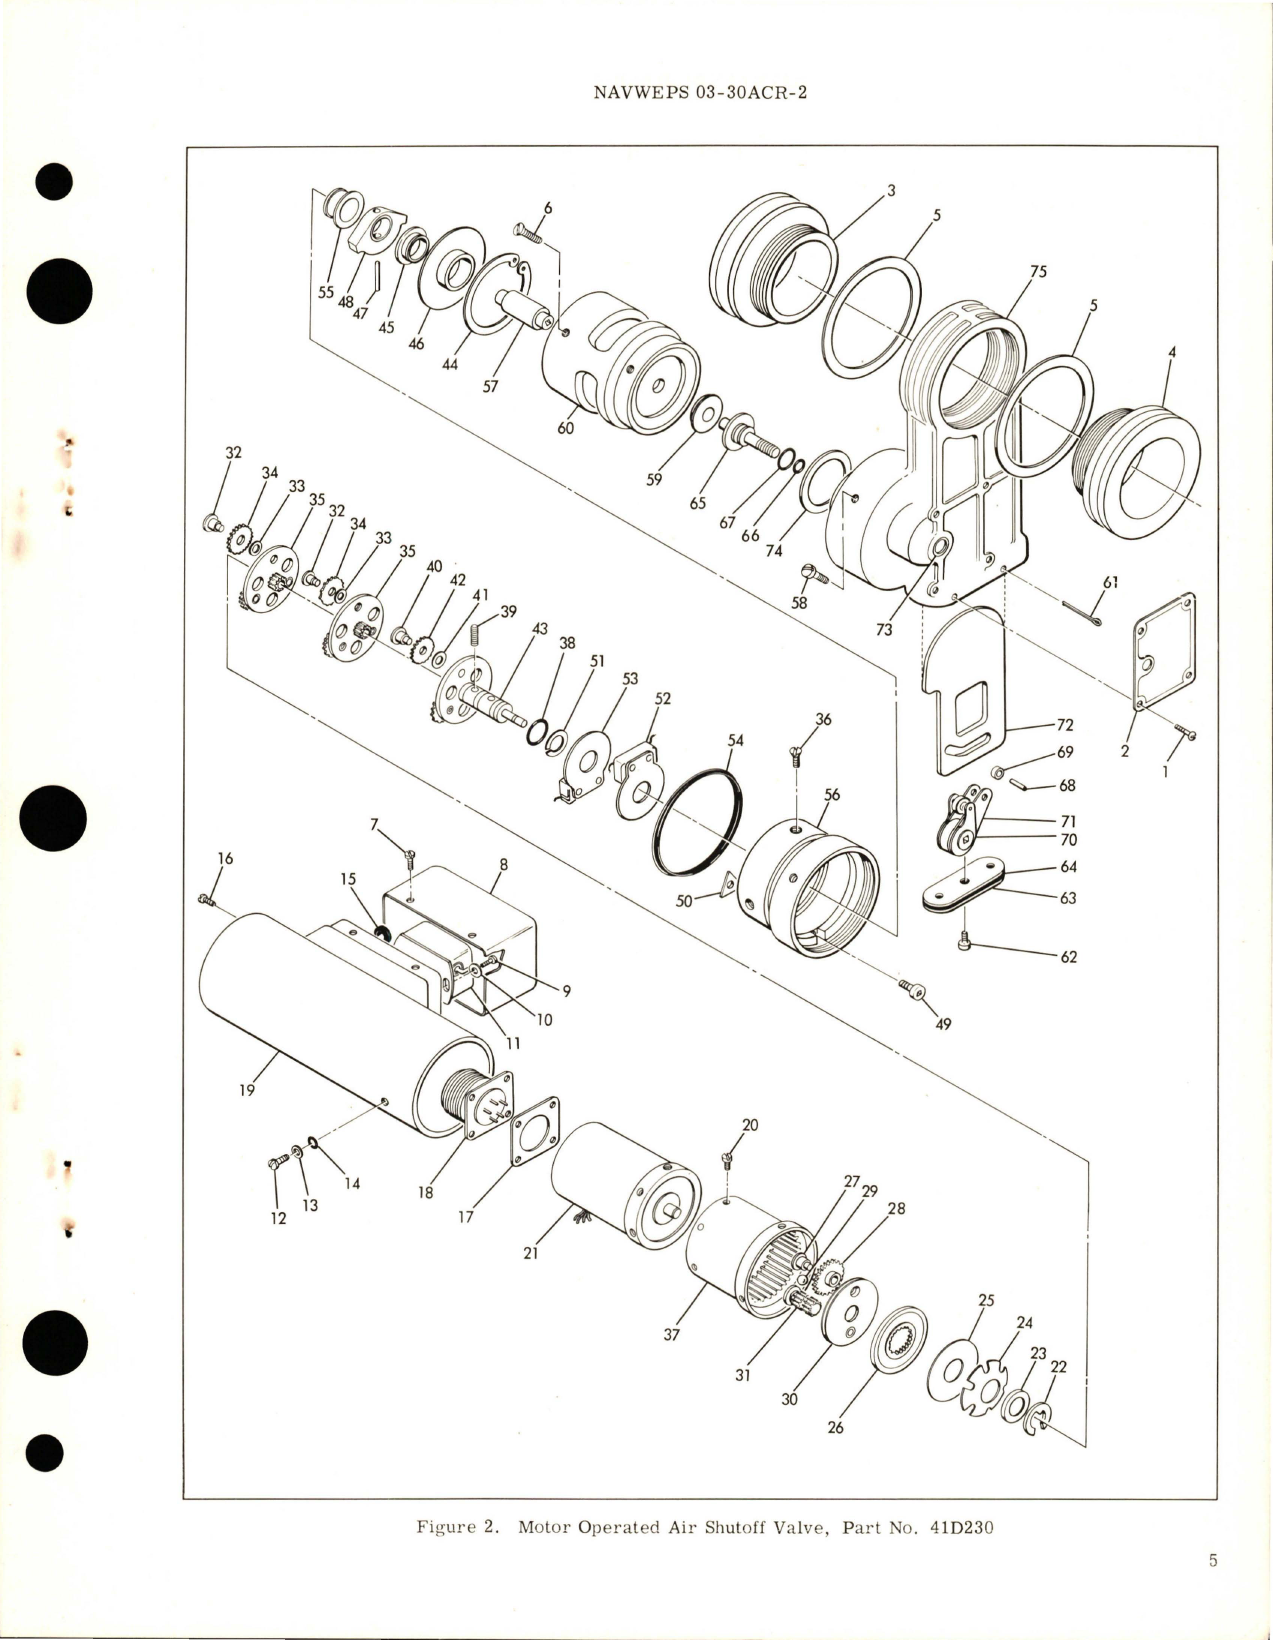 Sample page 5 from AirCorps Library document: Overhaul Instructions with Parts Breakdown for Motor Operated Air Shutoff Valve - Part 41D230